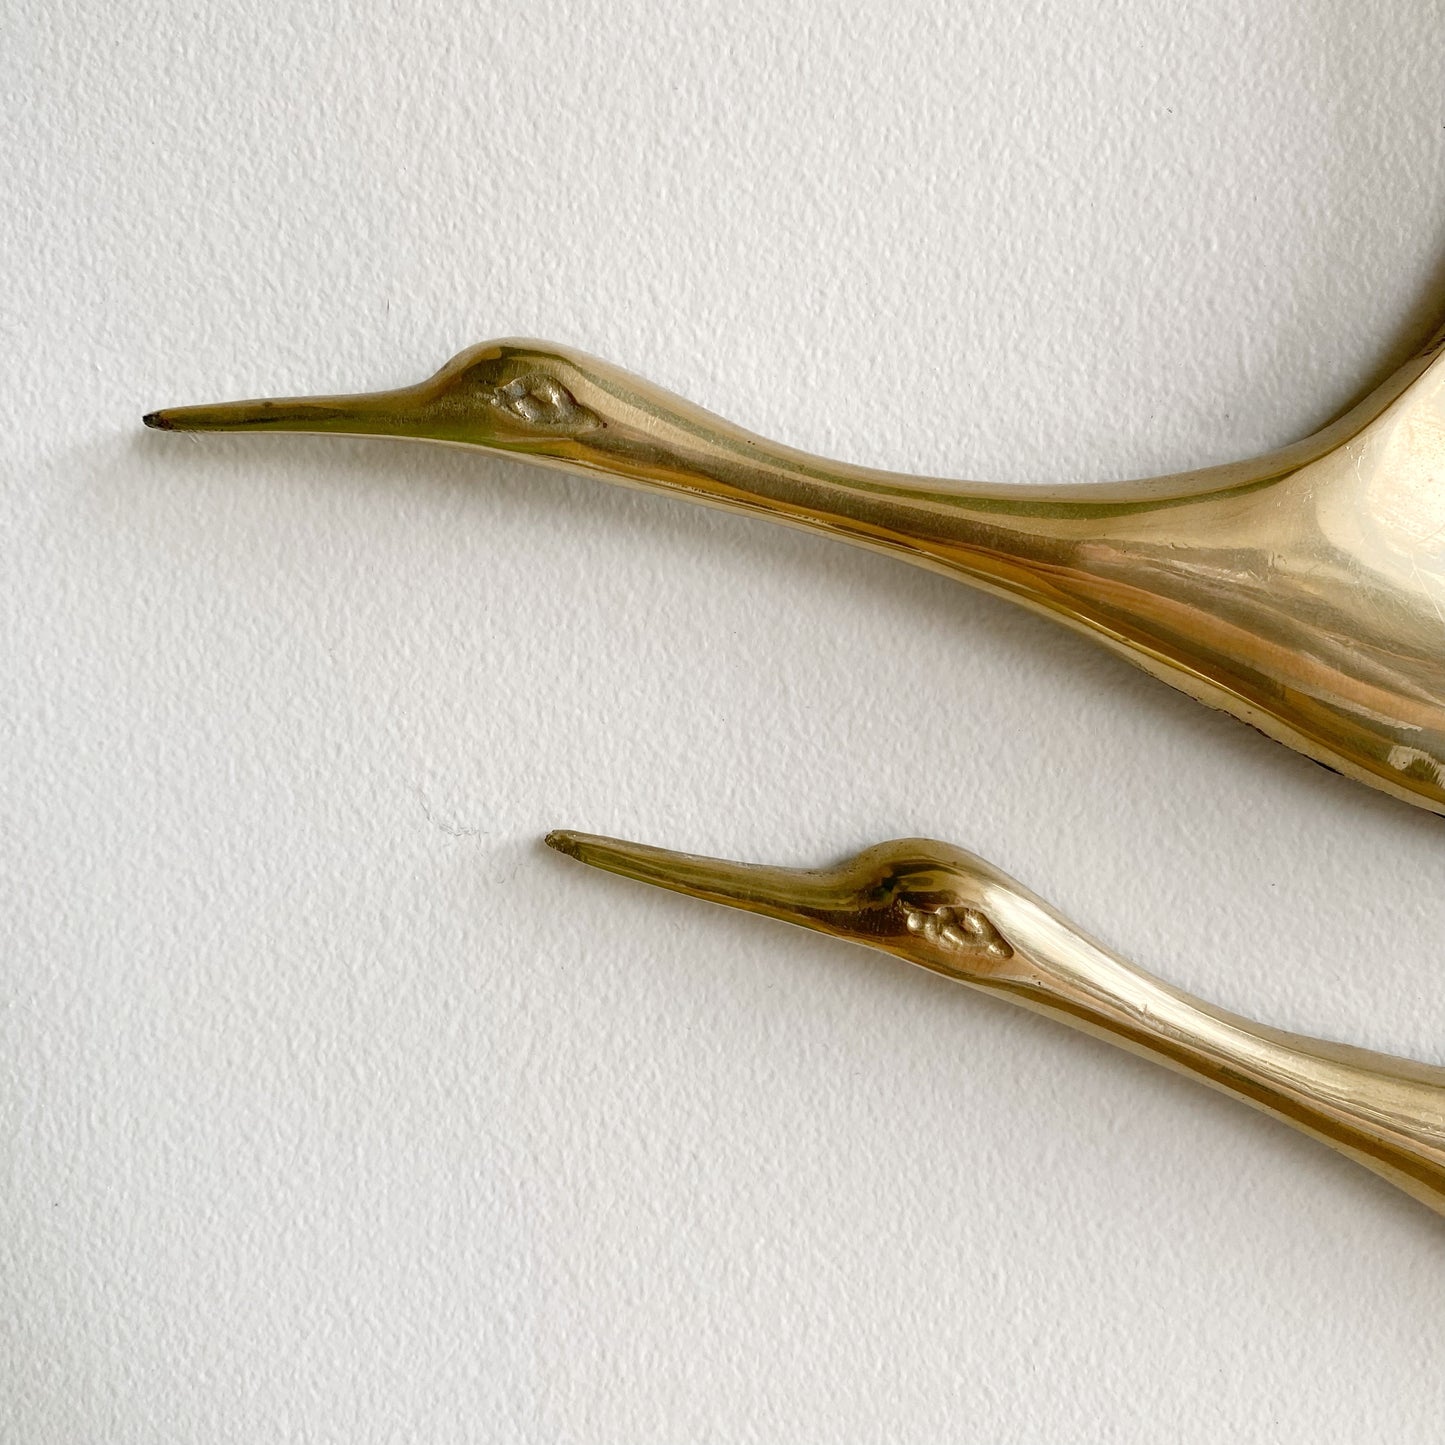 Vintage Brass Flying Geese Wall Decor, 14"